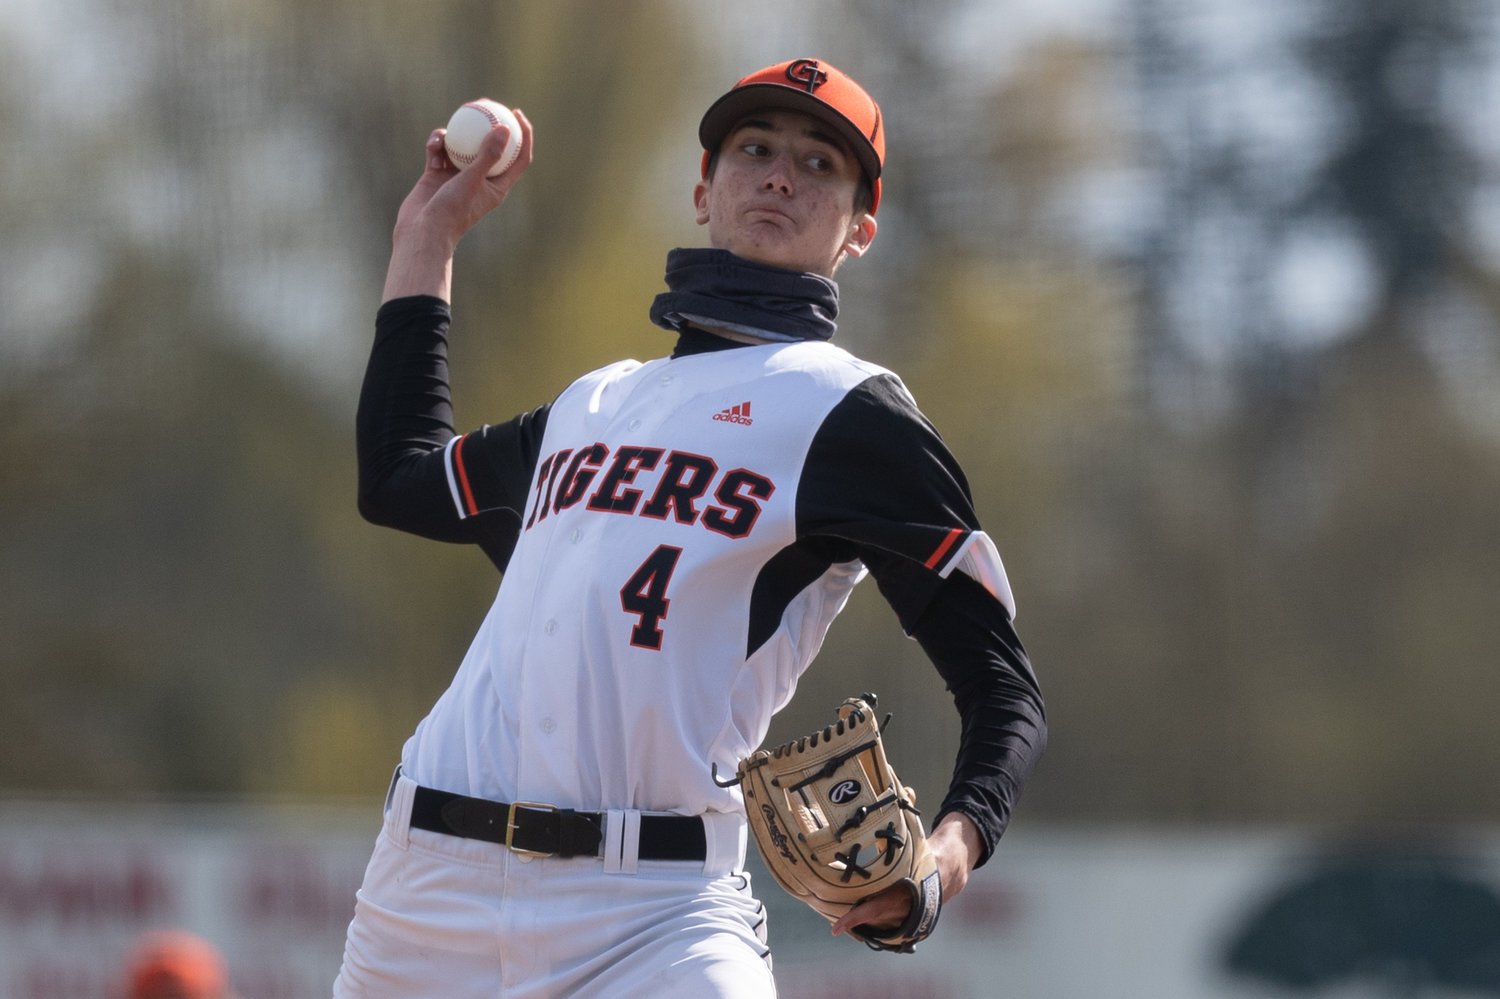 Centralia pitcher Broc Ruege sends a pitch off against W.F. West April 22 at Ed Wheeler FIeld.